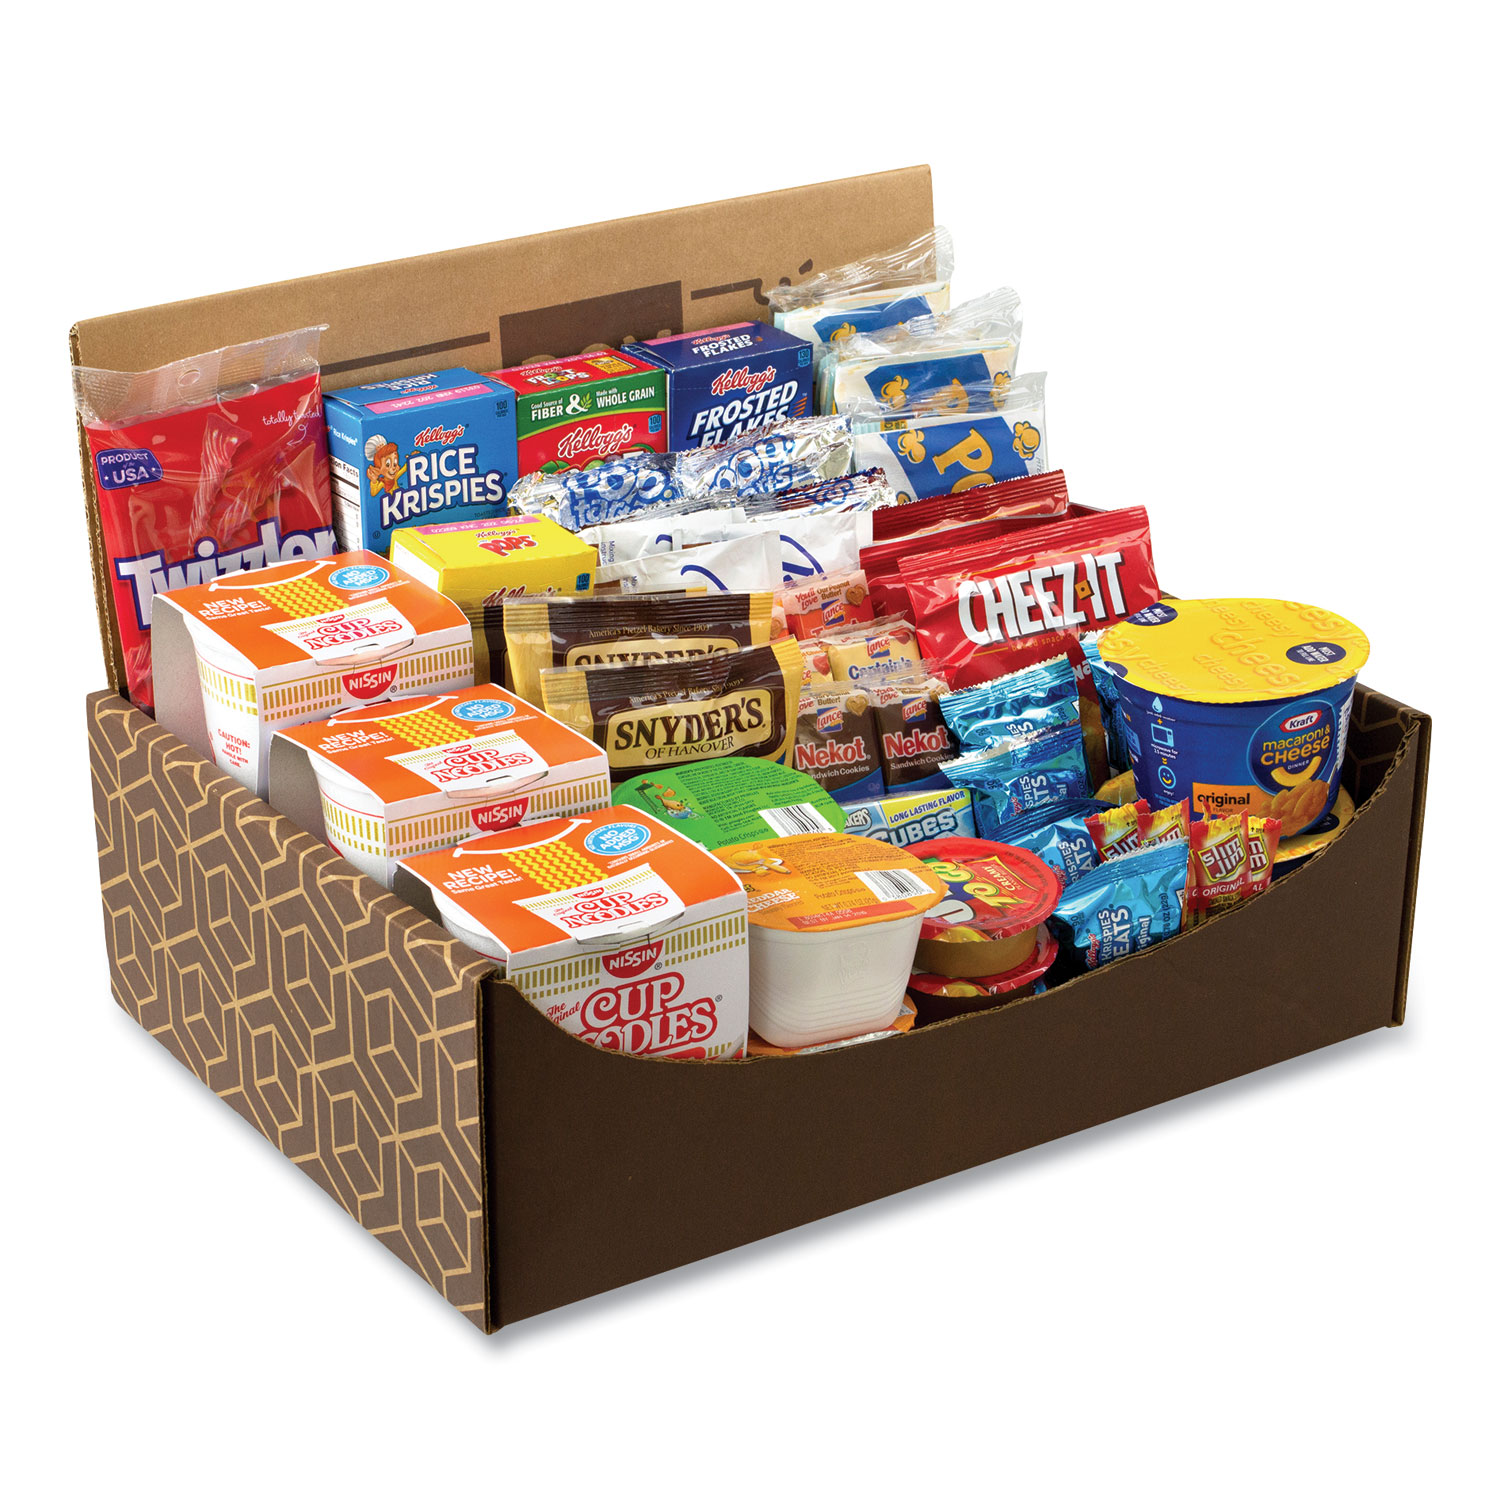 Snack Box Pros Dorm Room Survival Snack Box, 55 Assorted Snacks, Free Delivery in 1-4 Business Days